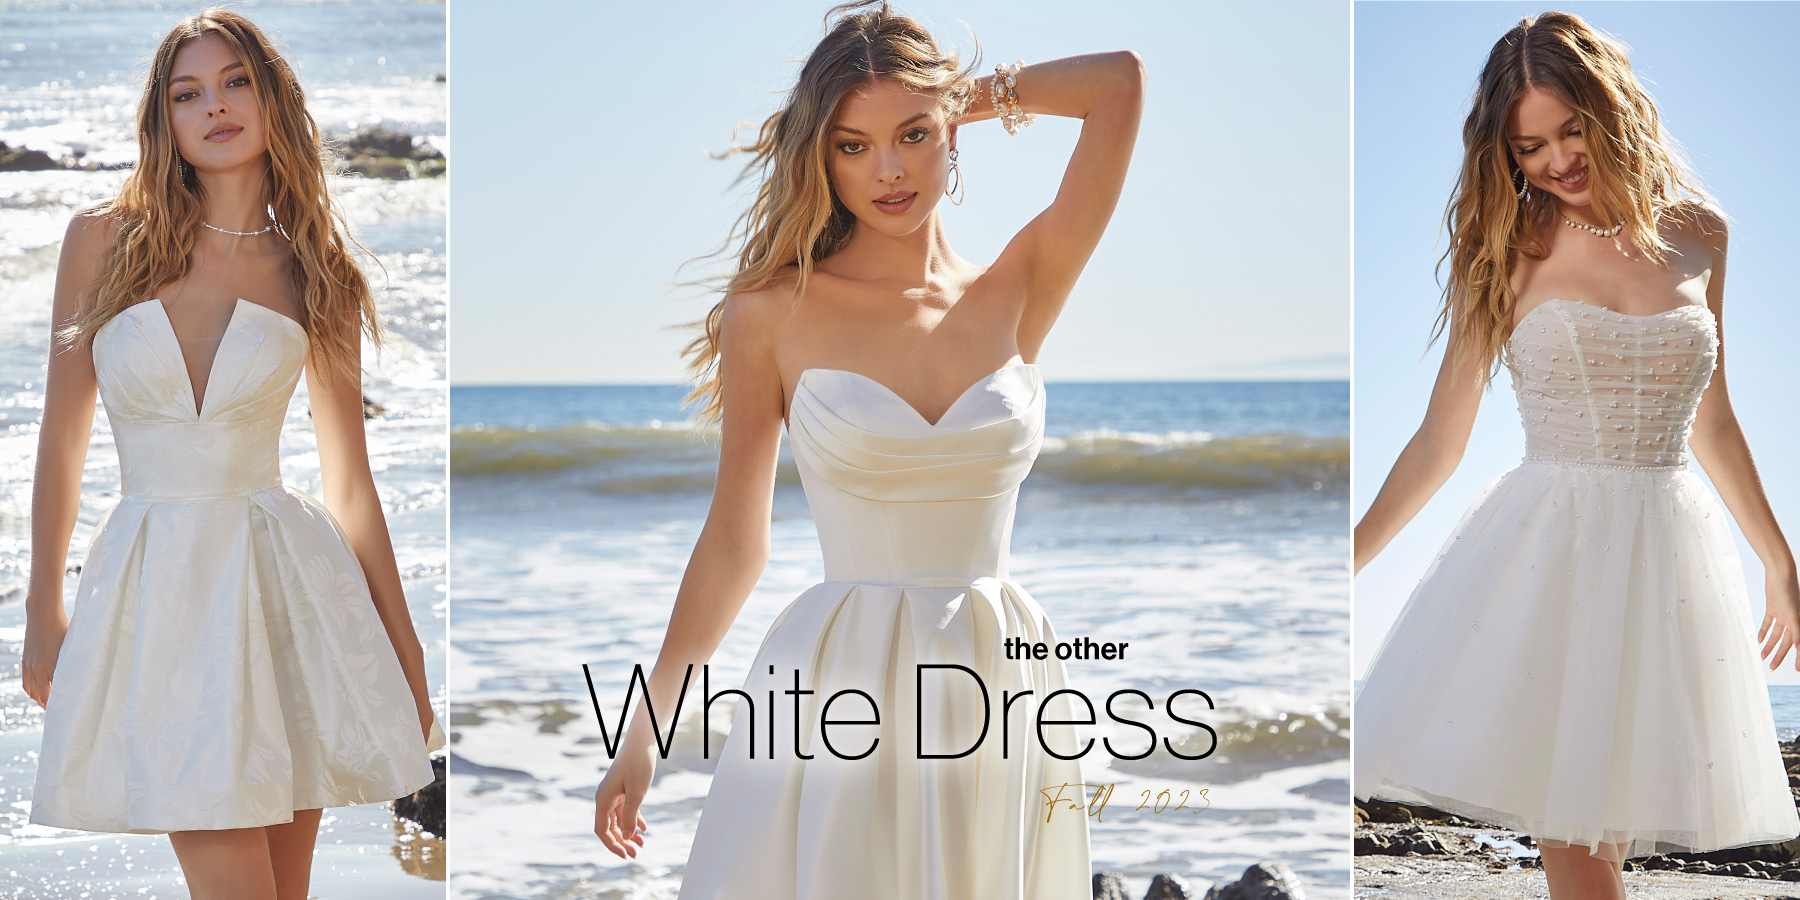 The Other White Dress